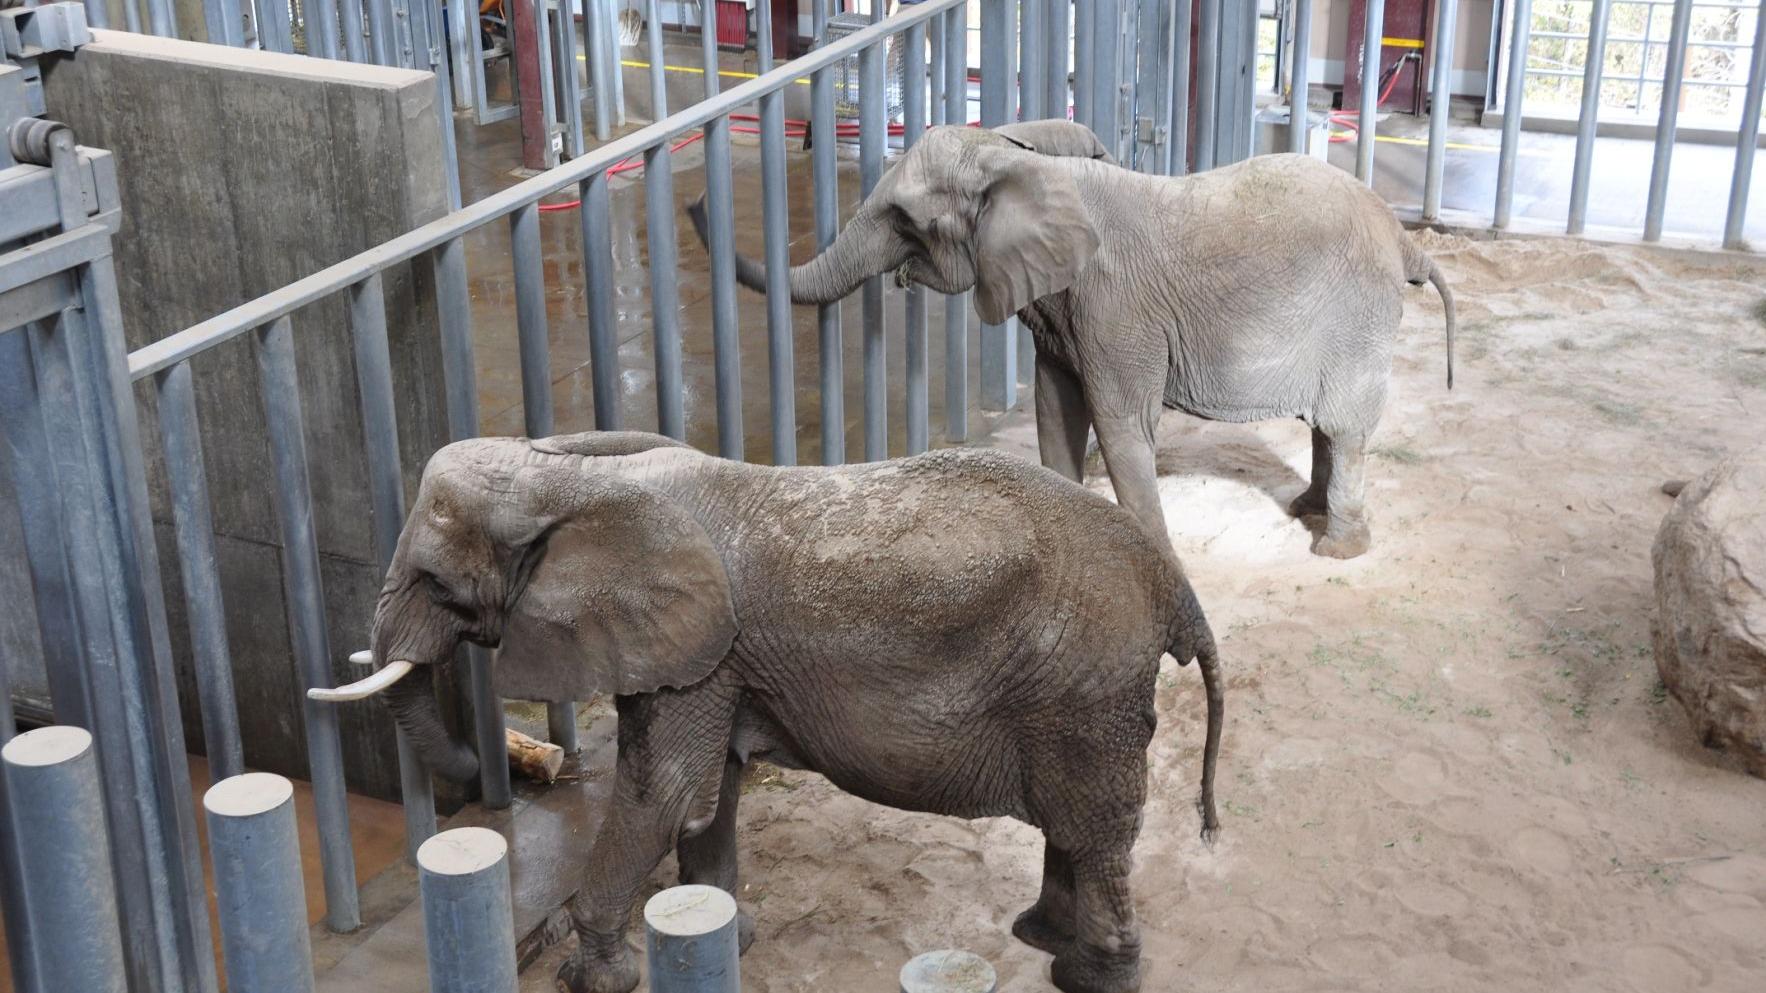 Two new elephants are now calling Cheyenne Mountain Zoo home | News |  